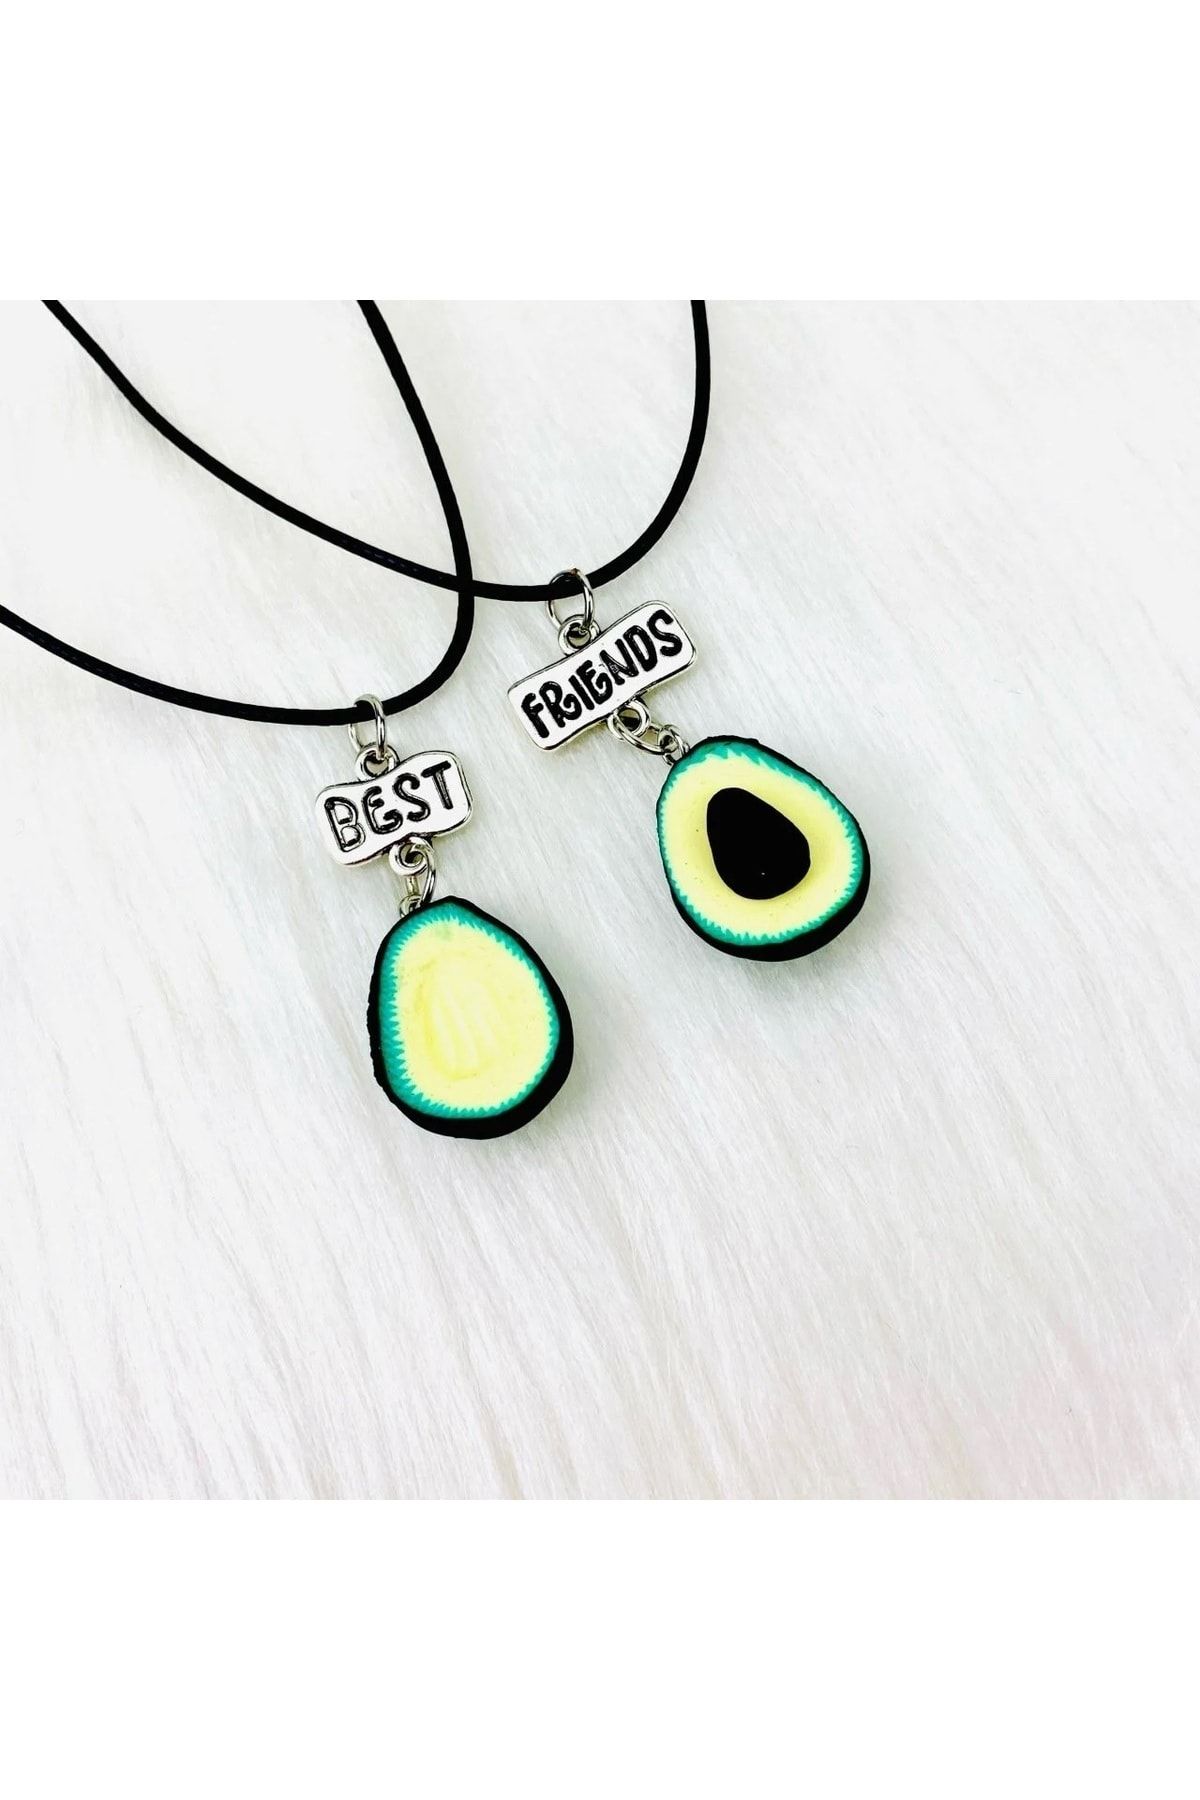 Buy BFF Necklace for 2 Green Avocado Charm Friendship Necklace Best Friend  Gift Avocado Necklace Miniature Food BFF Present Healthy Food Jewelry  Online in India - Etsy